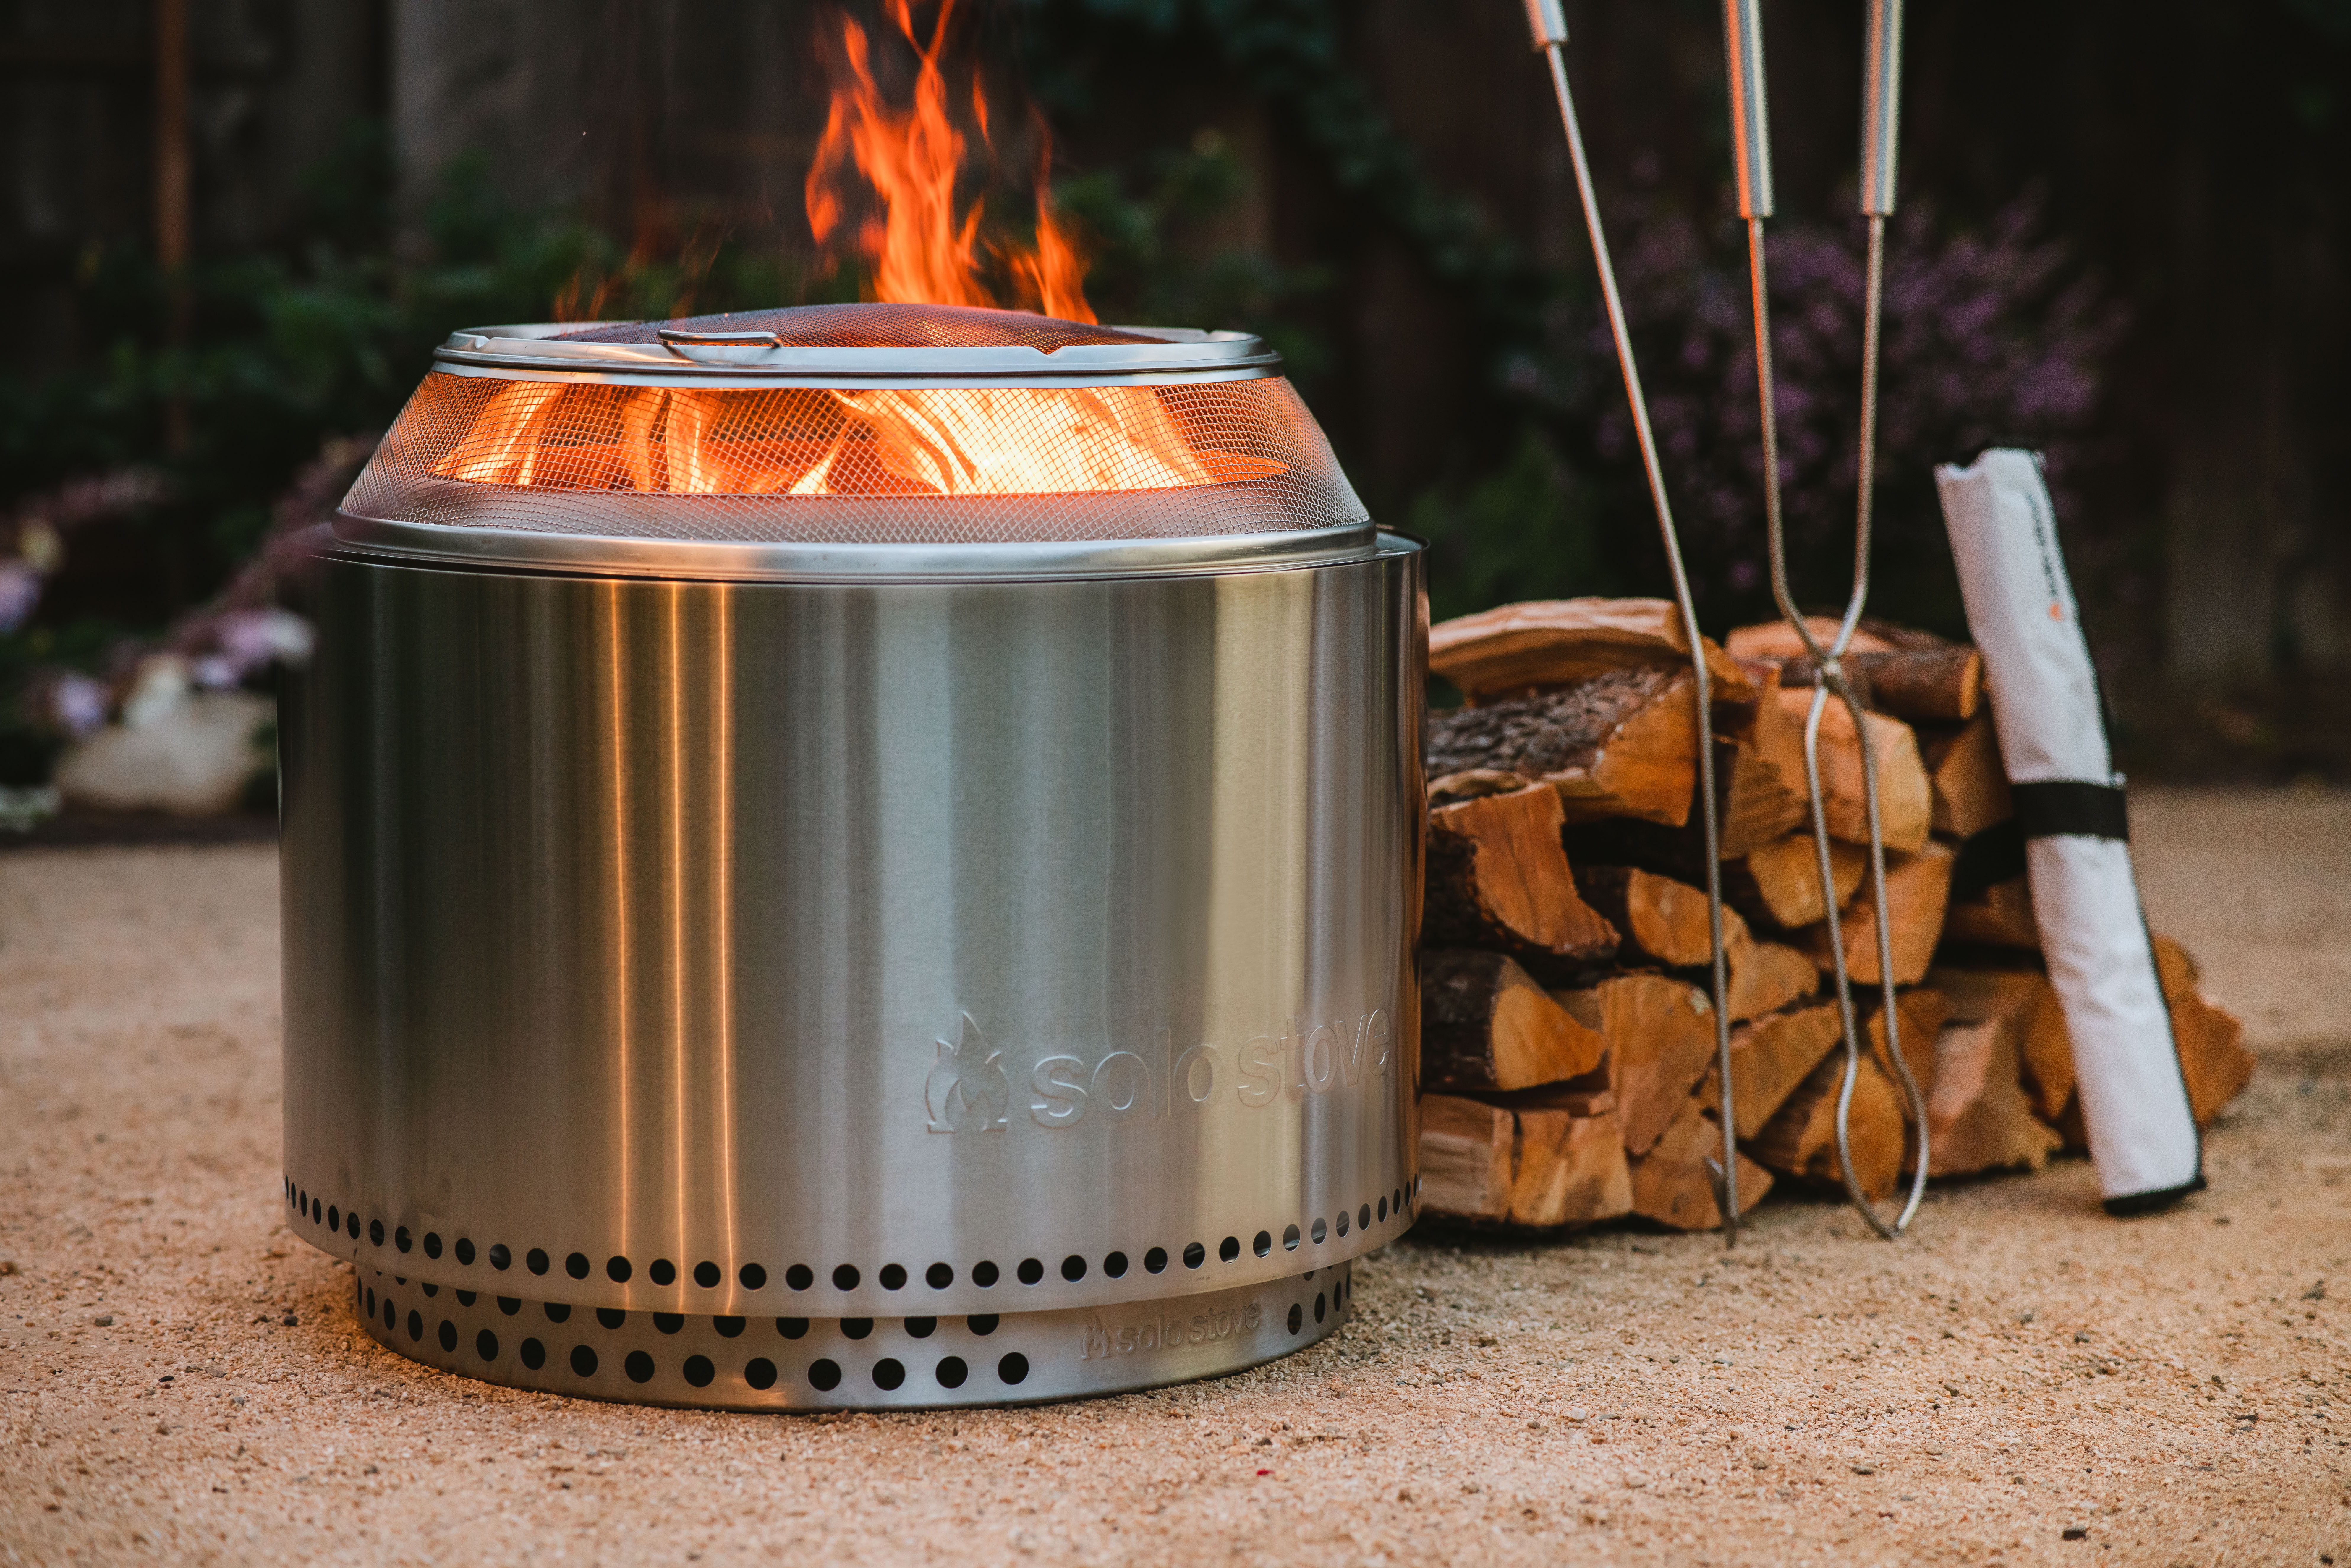 From Solo Stove Fire Pits to Yeti Coolers, Here Are the Best Last